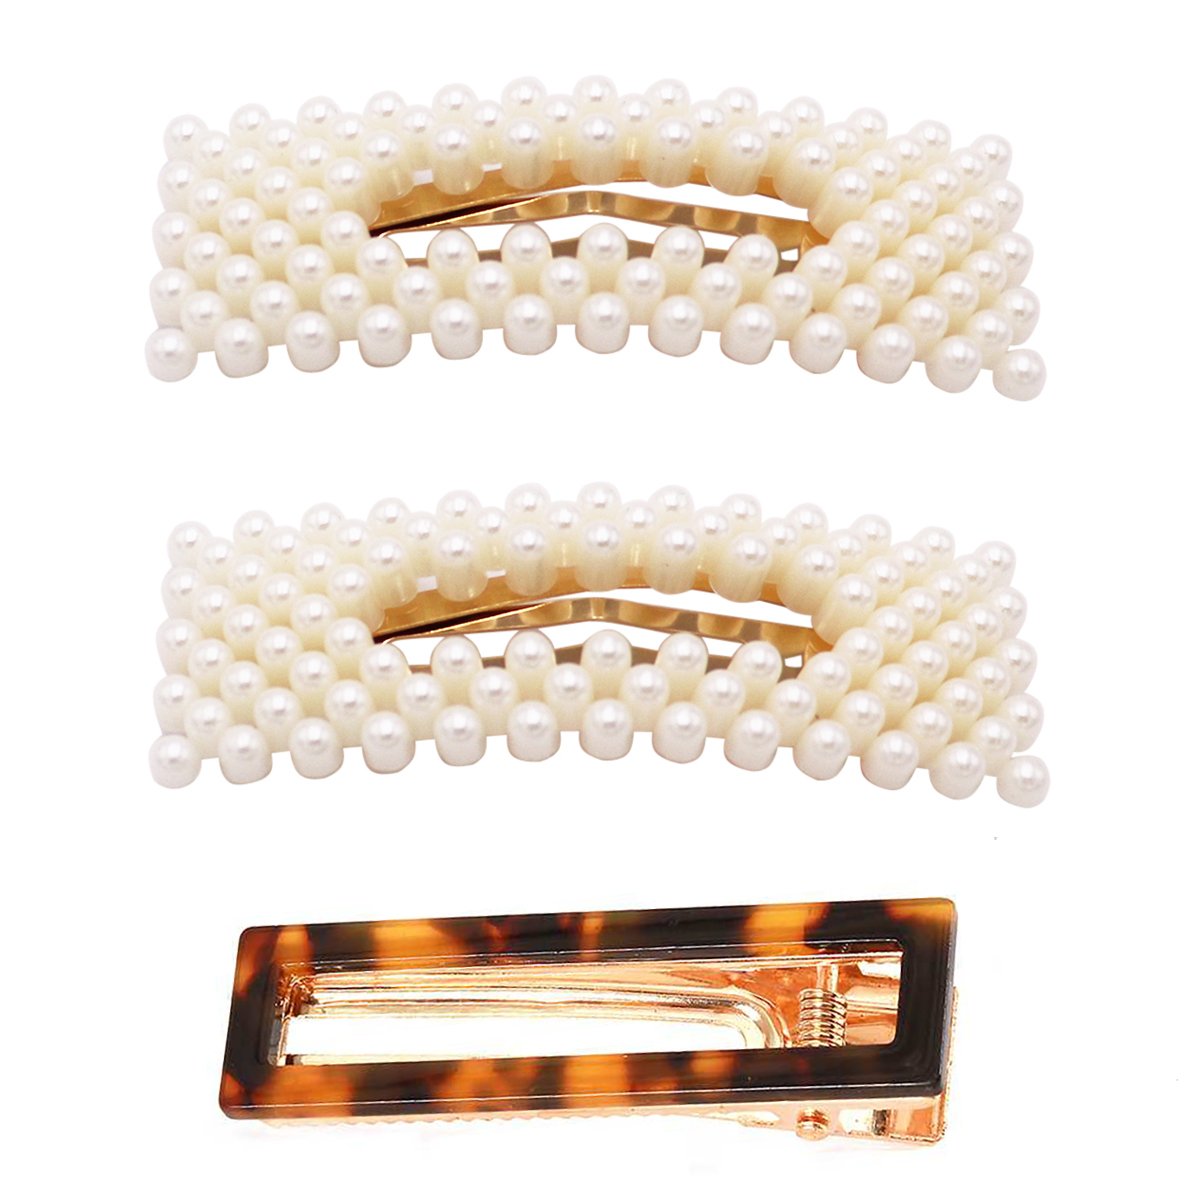 Set of 3 Acetate and Simulated Pearl Hair Clip Bobby Pins Snap Hair Barrette Accessories (Tortoise and Gold Tone Pearls)